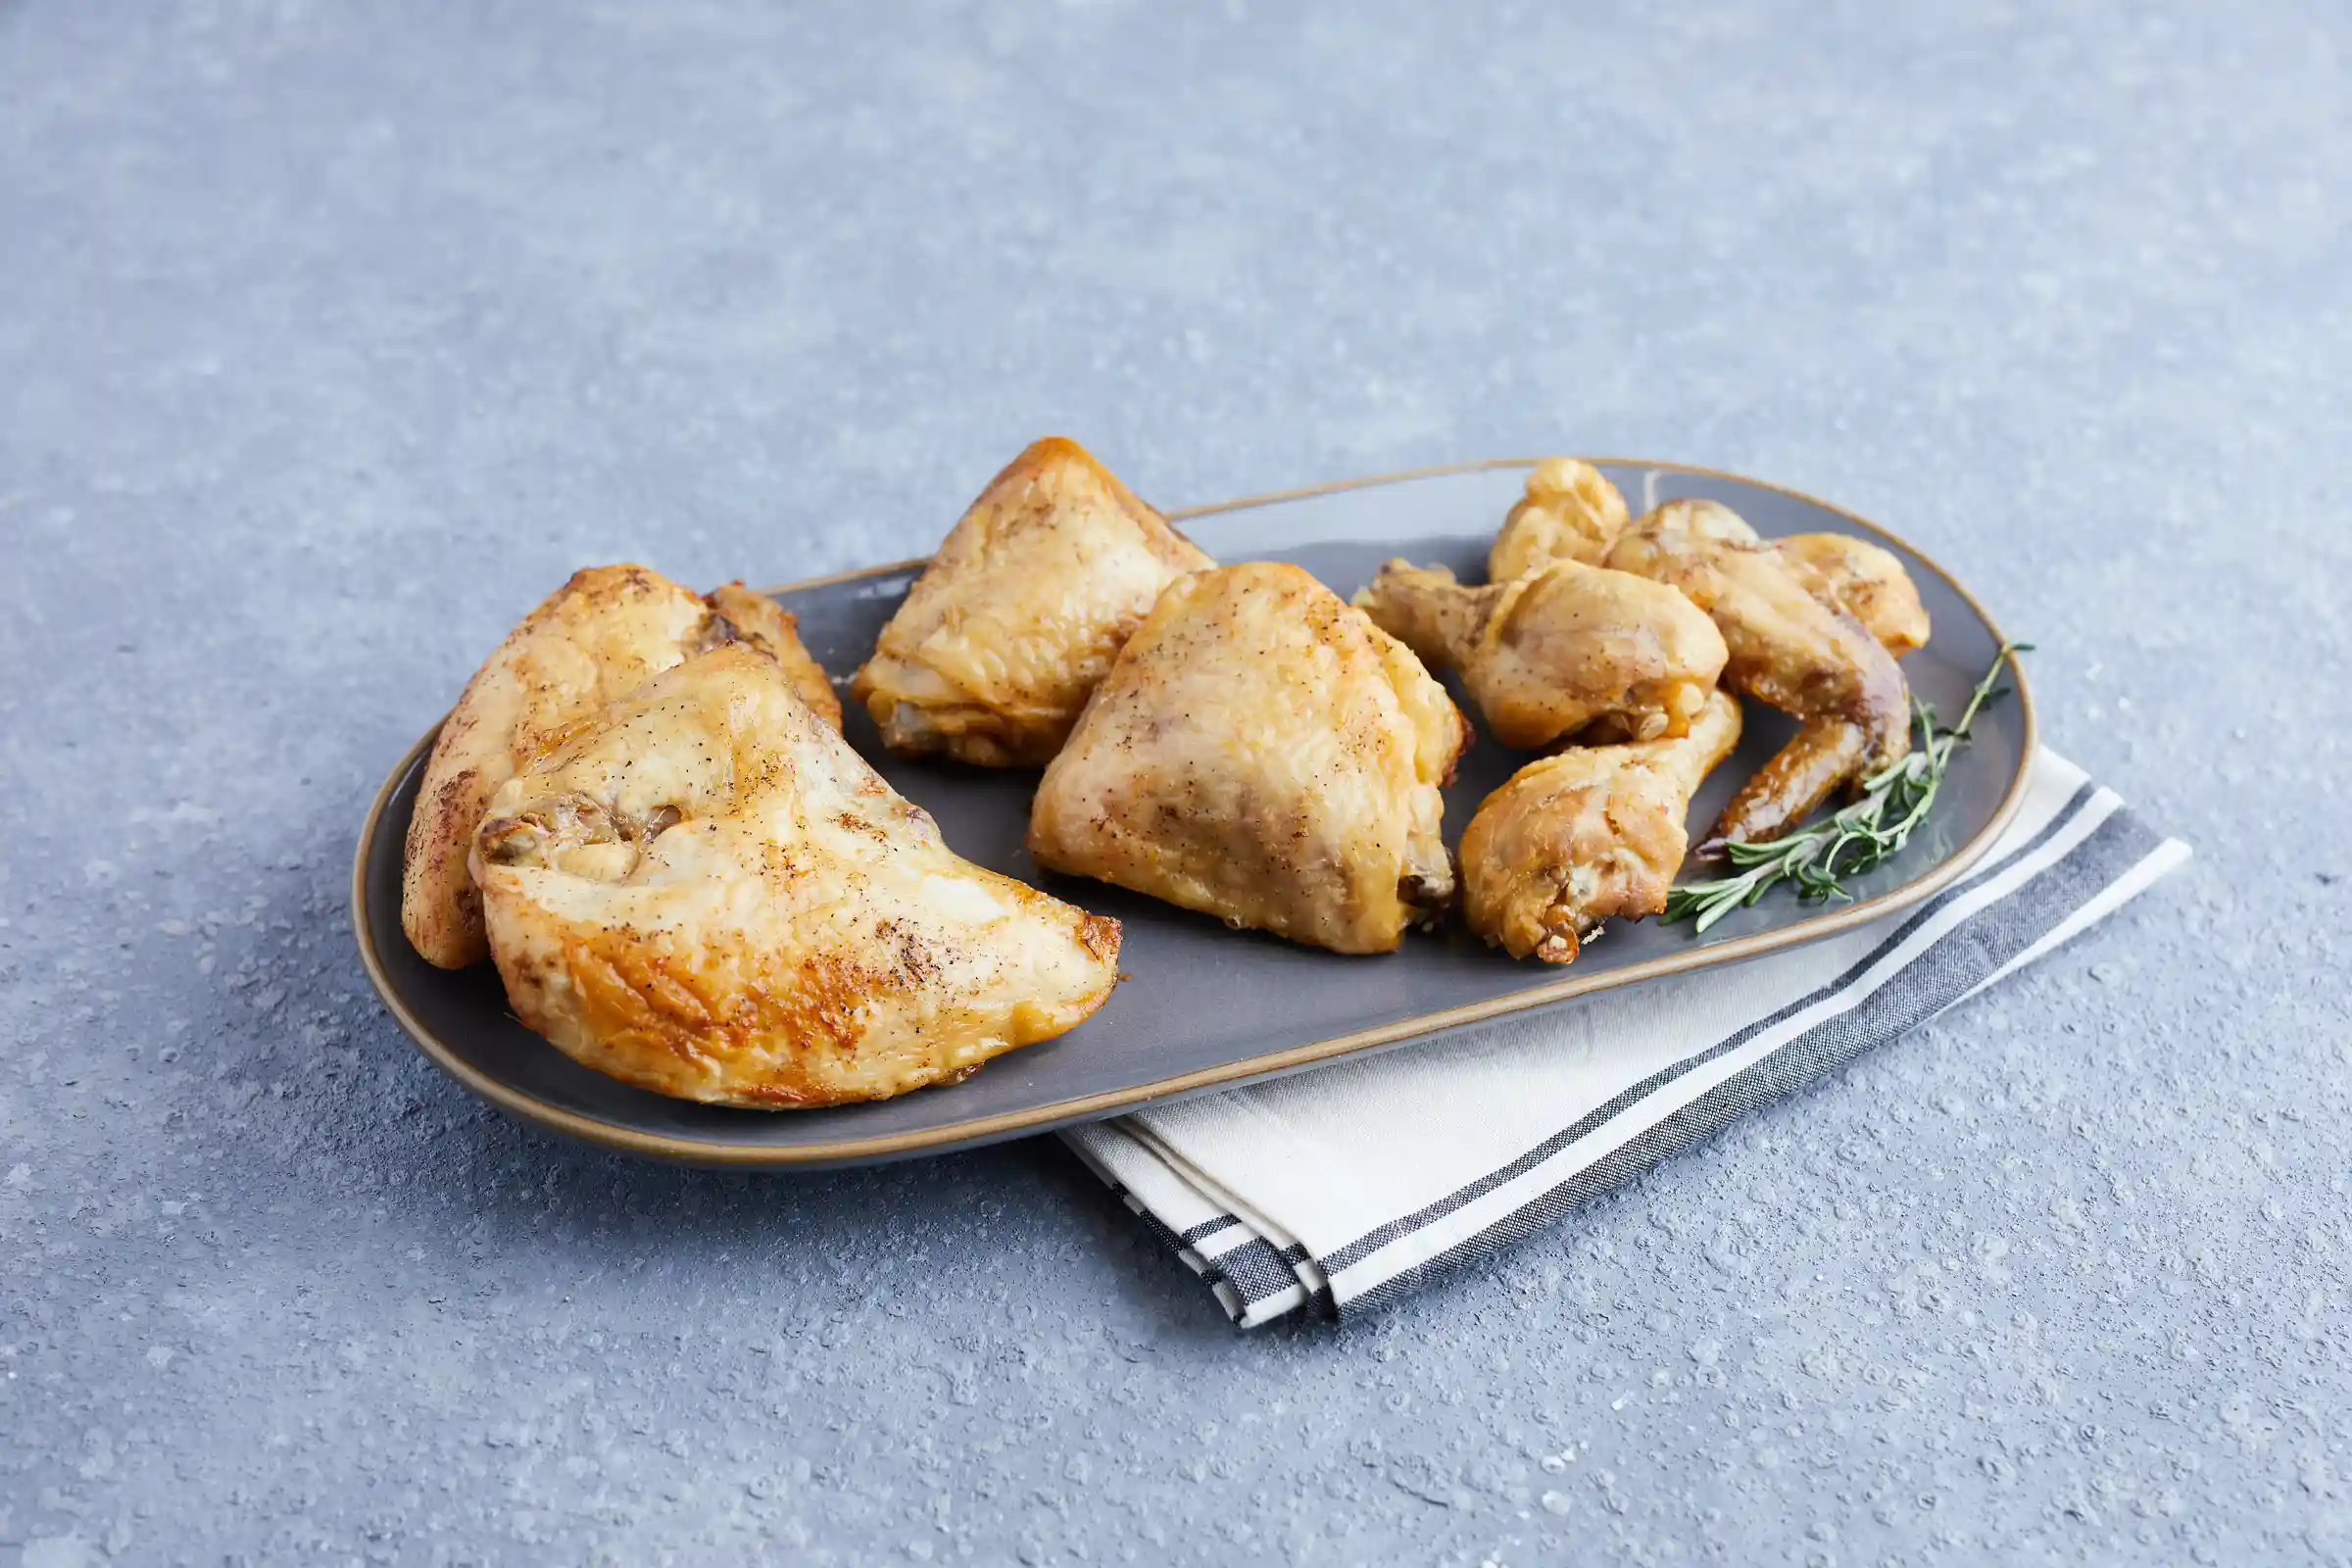 Tyson® 100% All Natural* Uncooked 8 Piece Chicken Cuts_image_01